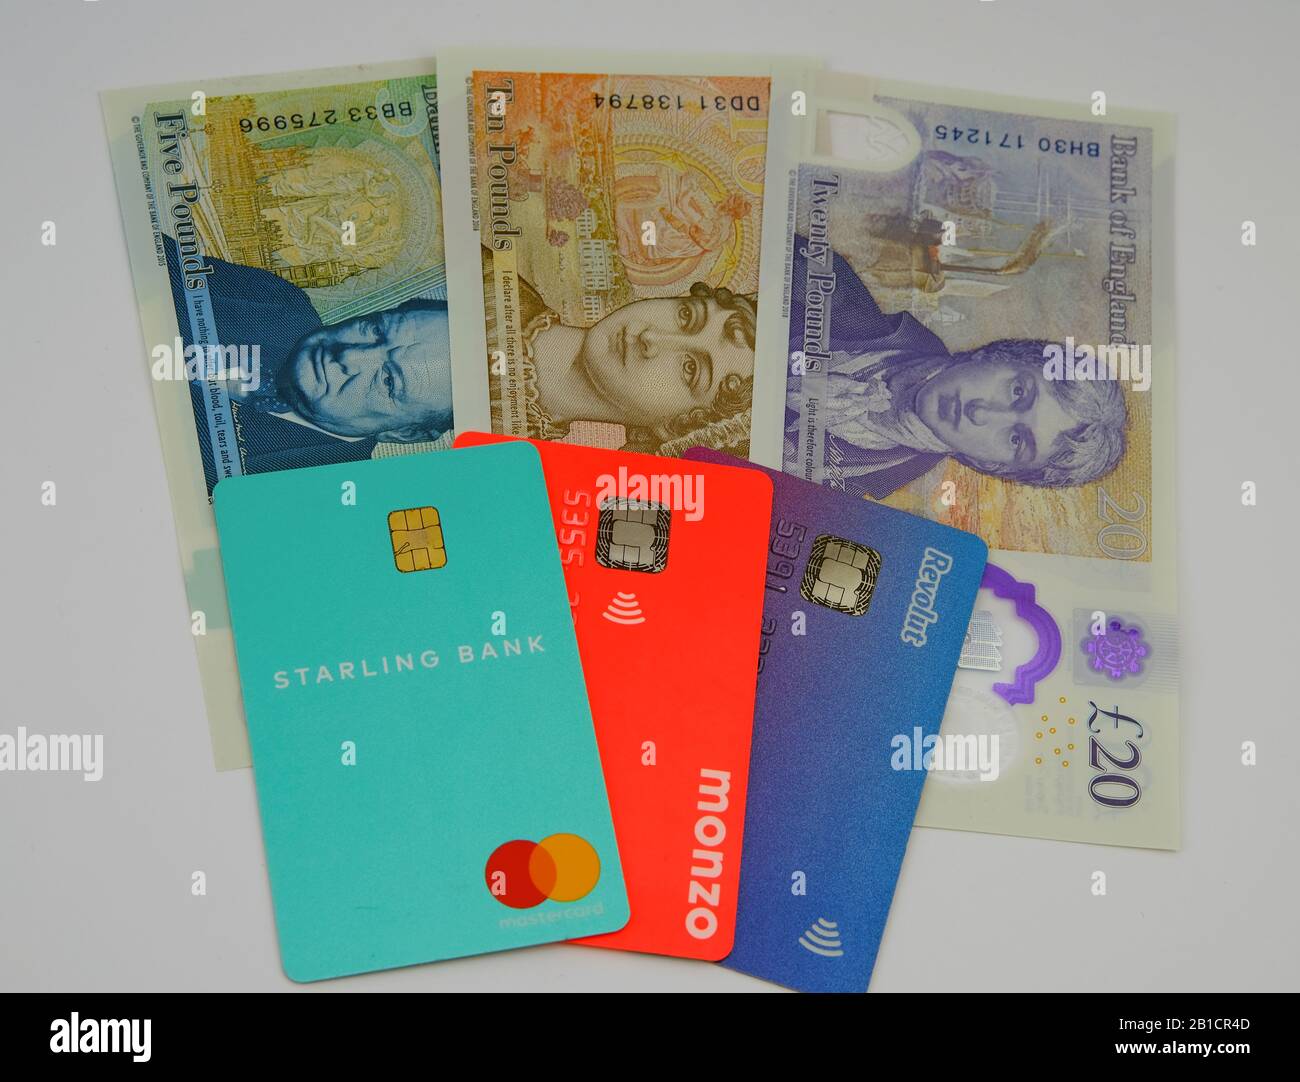 Starling, Monzo, Revolut bank cards on the new polymer pound sterling notes. Concept to highlight similar colour gamma of the British bills and bank. Stock Photo